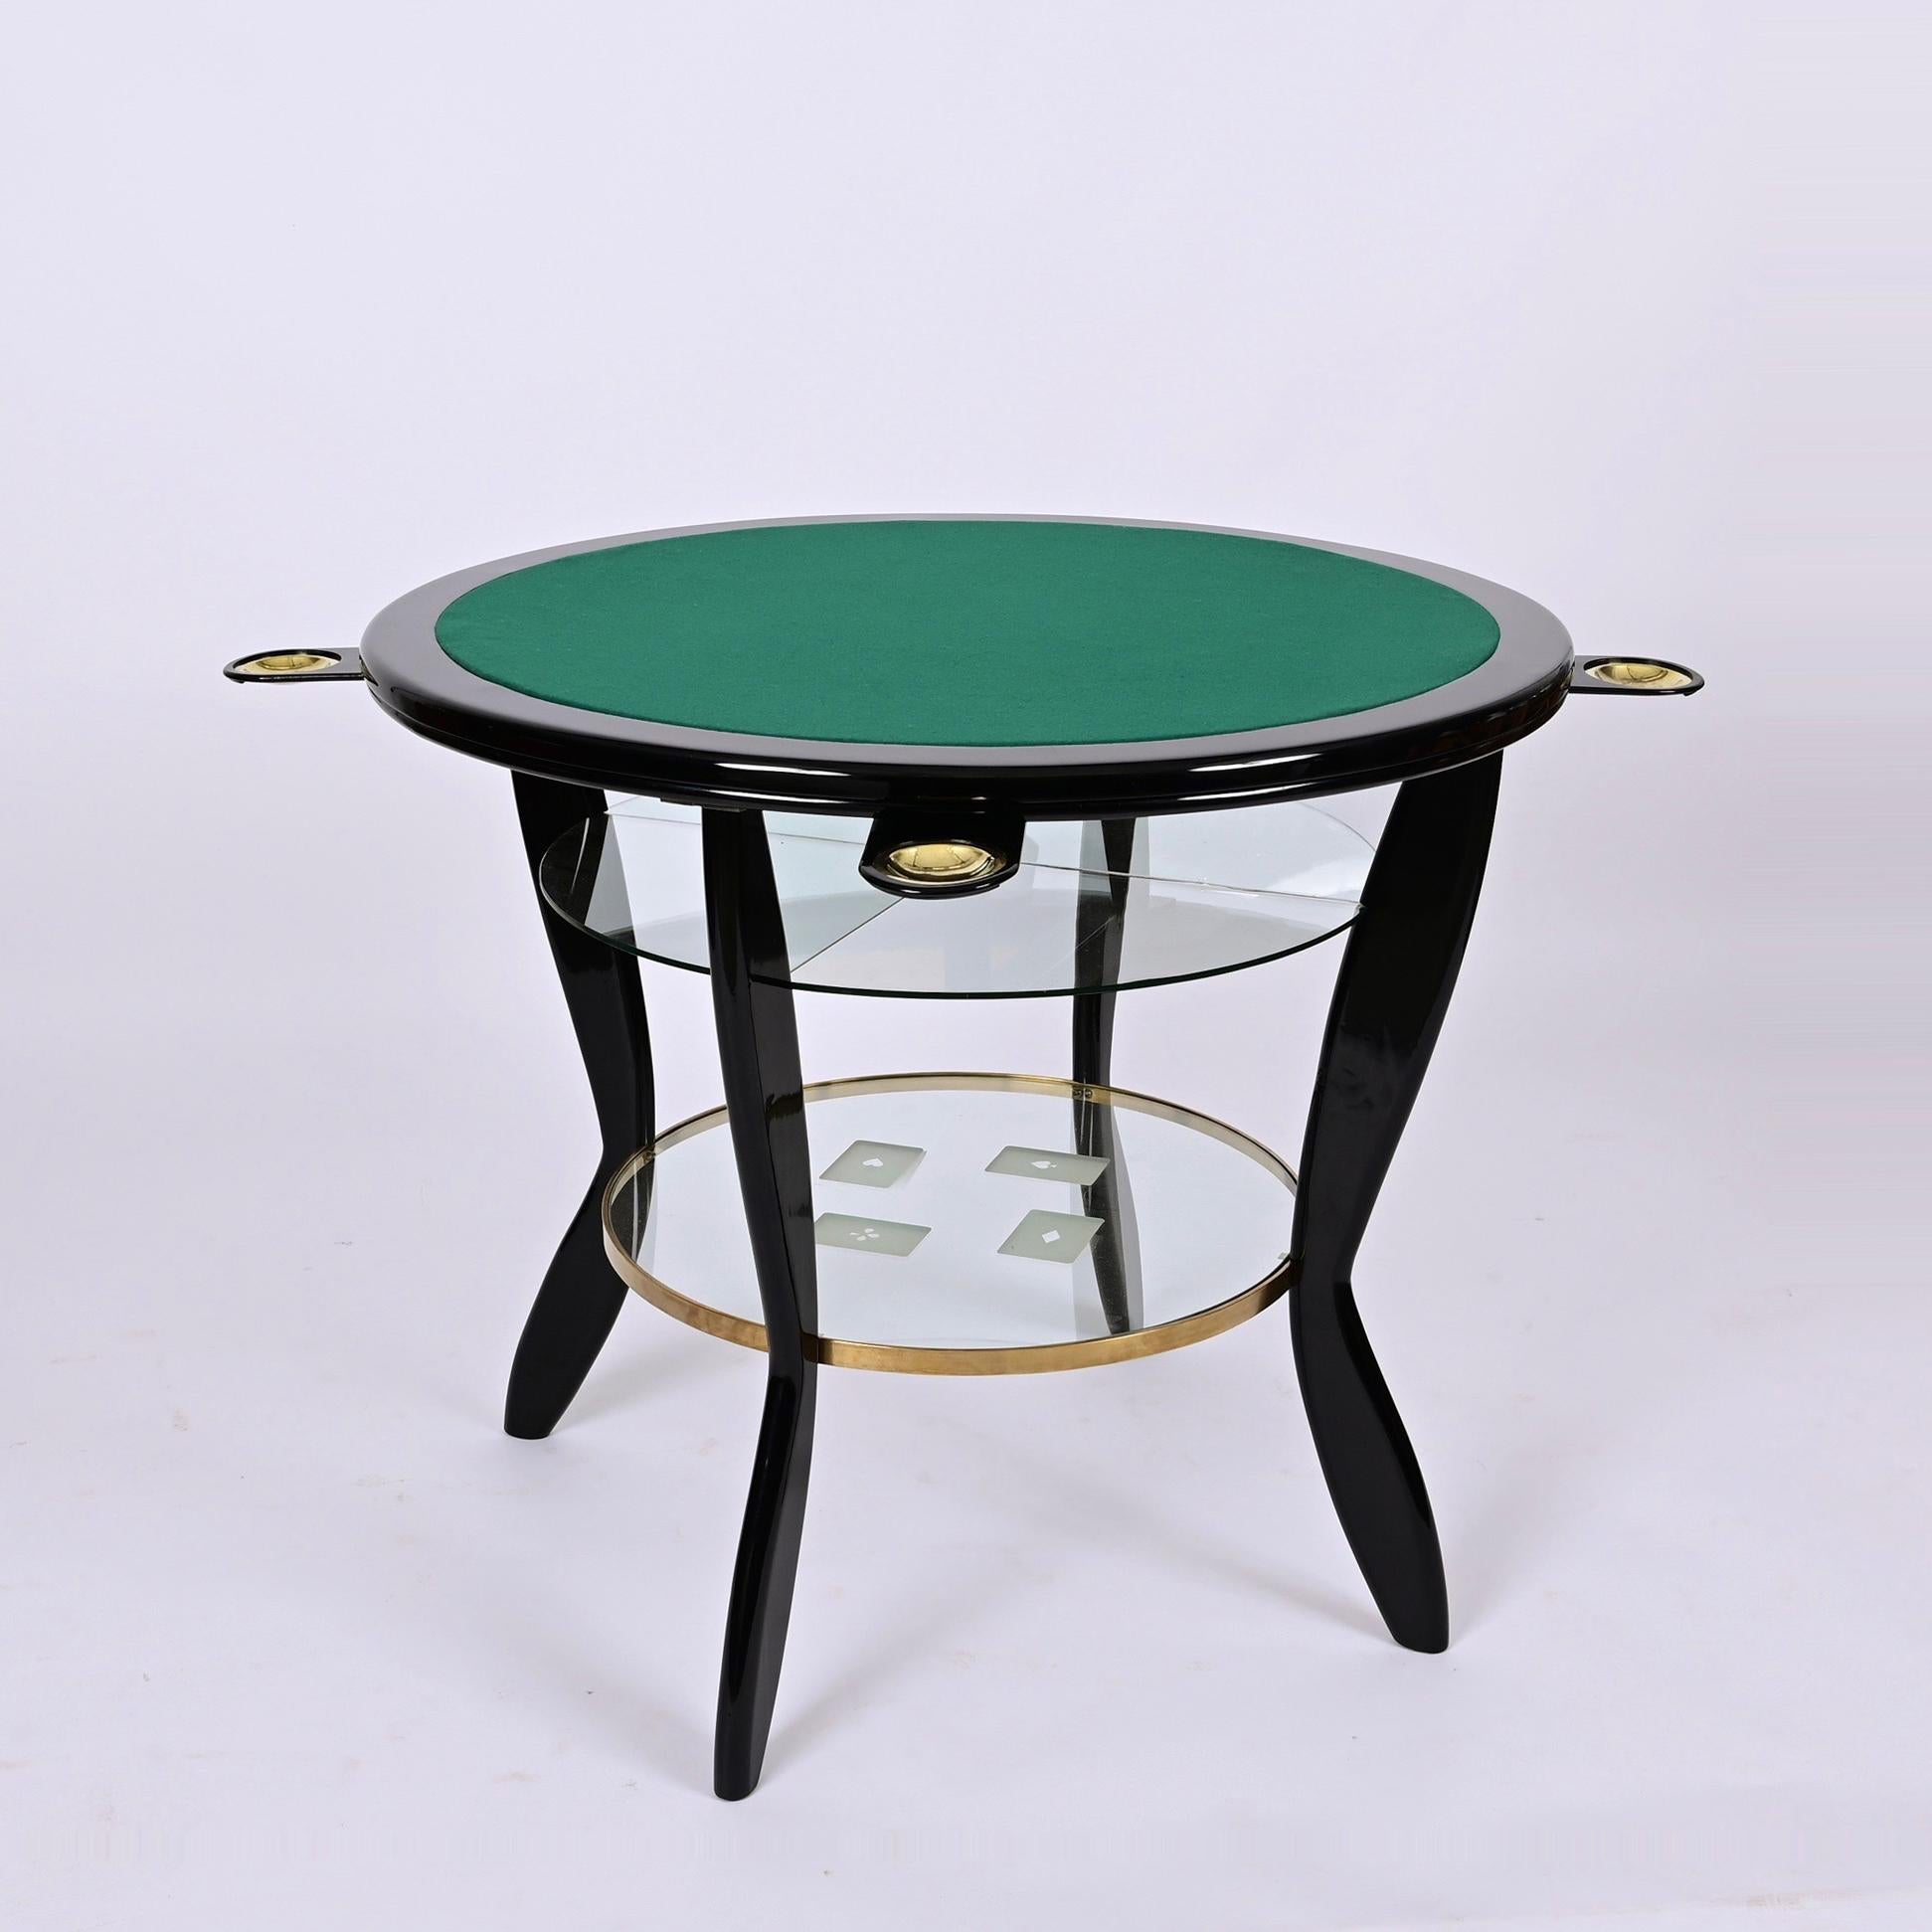 Gio Ponti Style Ebonized Beech and Brass Italian Game Table with Glass, 1950s For Sale 5